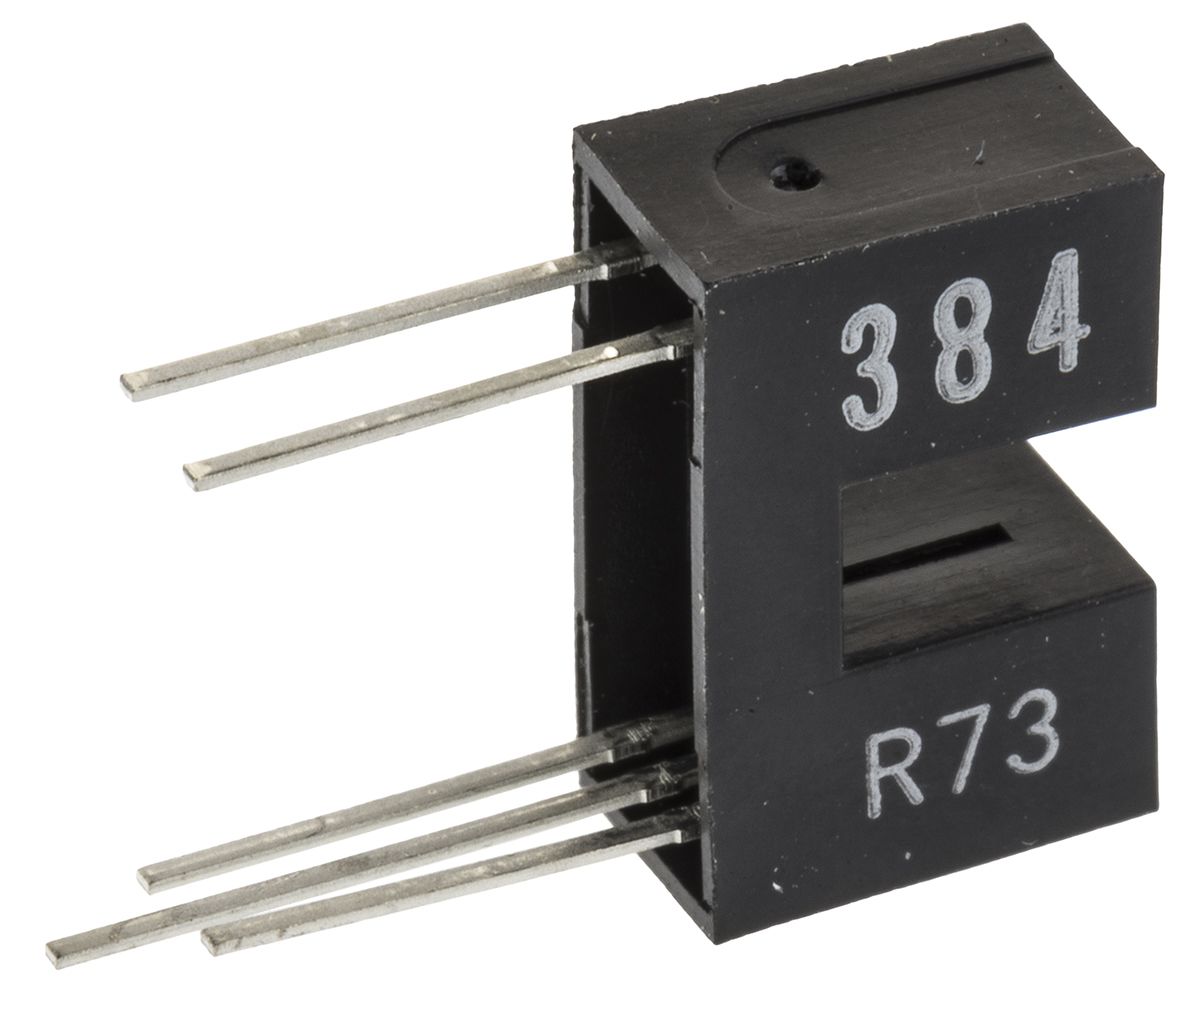 EE-SX384 Omron, Through Hole Slotted Optical Switch, Phototransistor Output